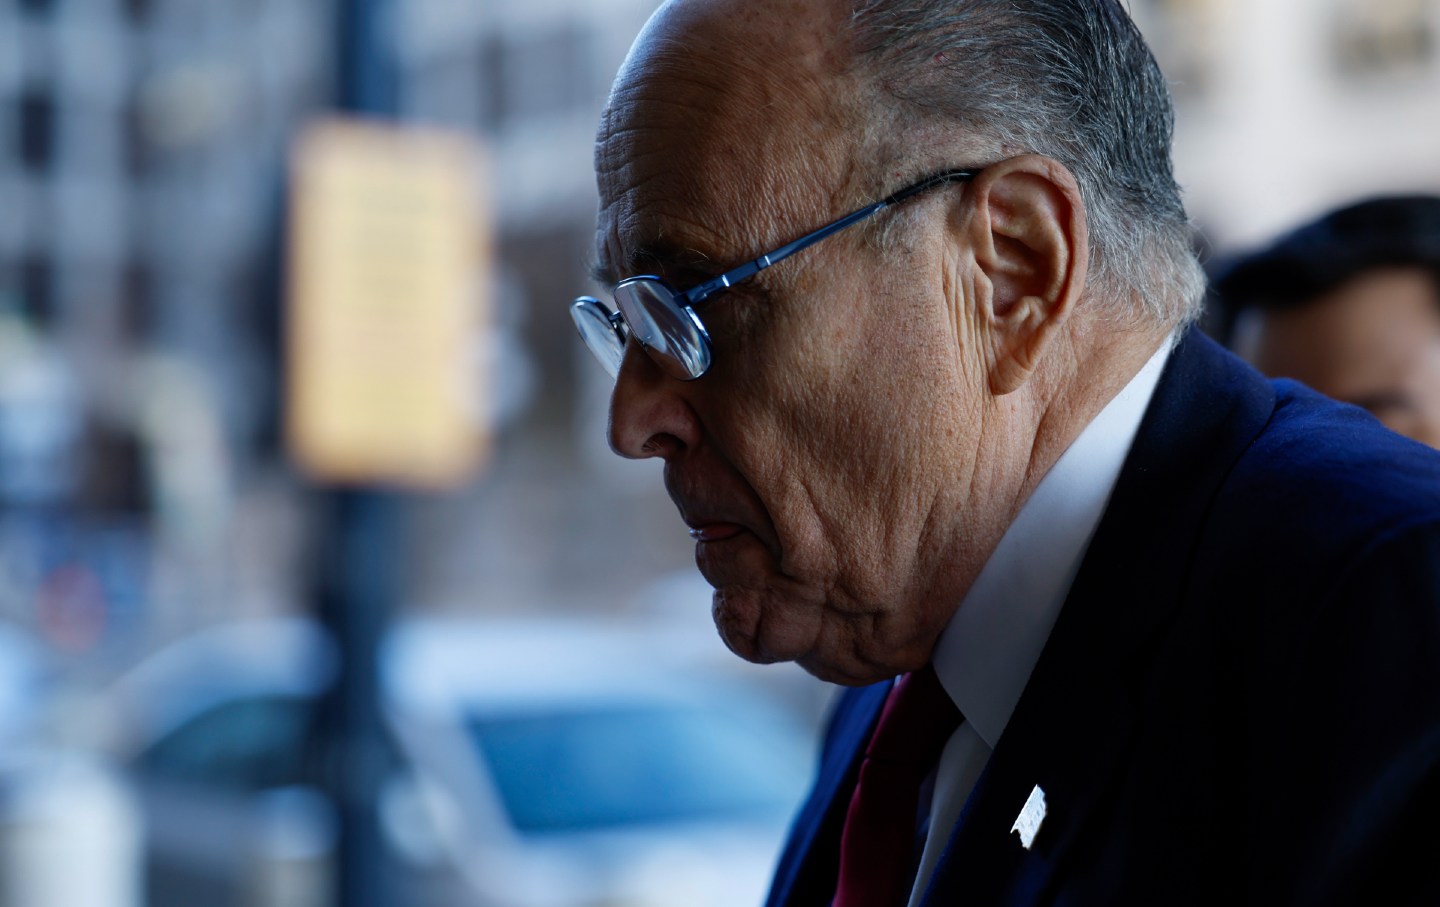 Rudy Giuliani, the former personal lawyer for Donald Trump, arrives at the E. Barrett Prettyman US District Courthouse on December 15, 2023, in Washington, D.C.